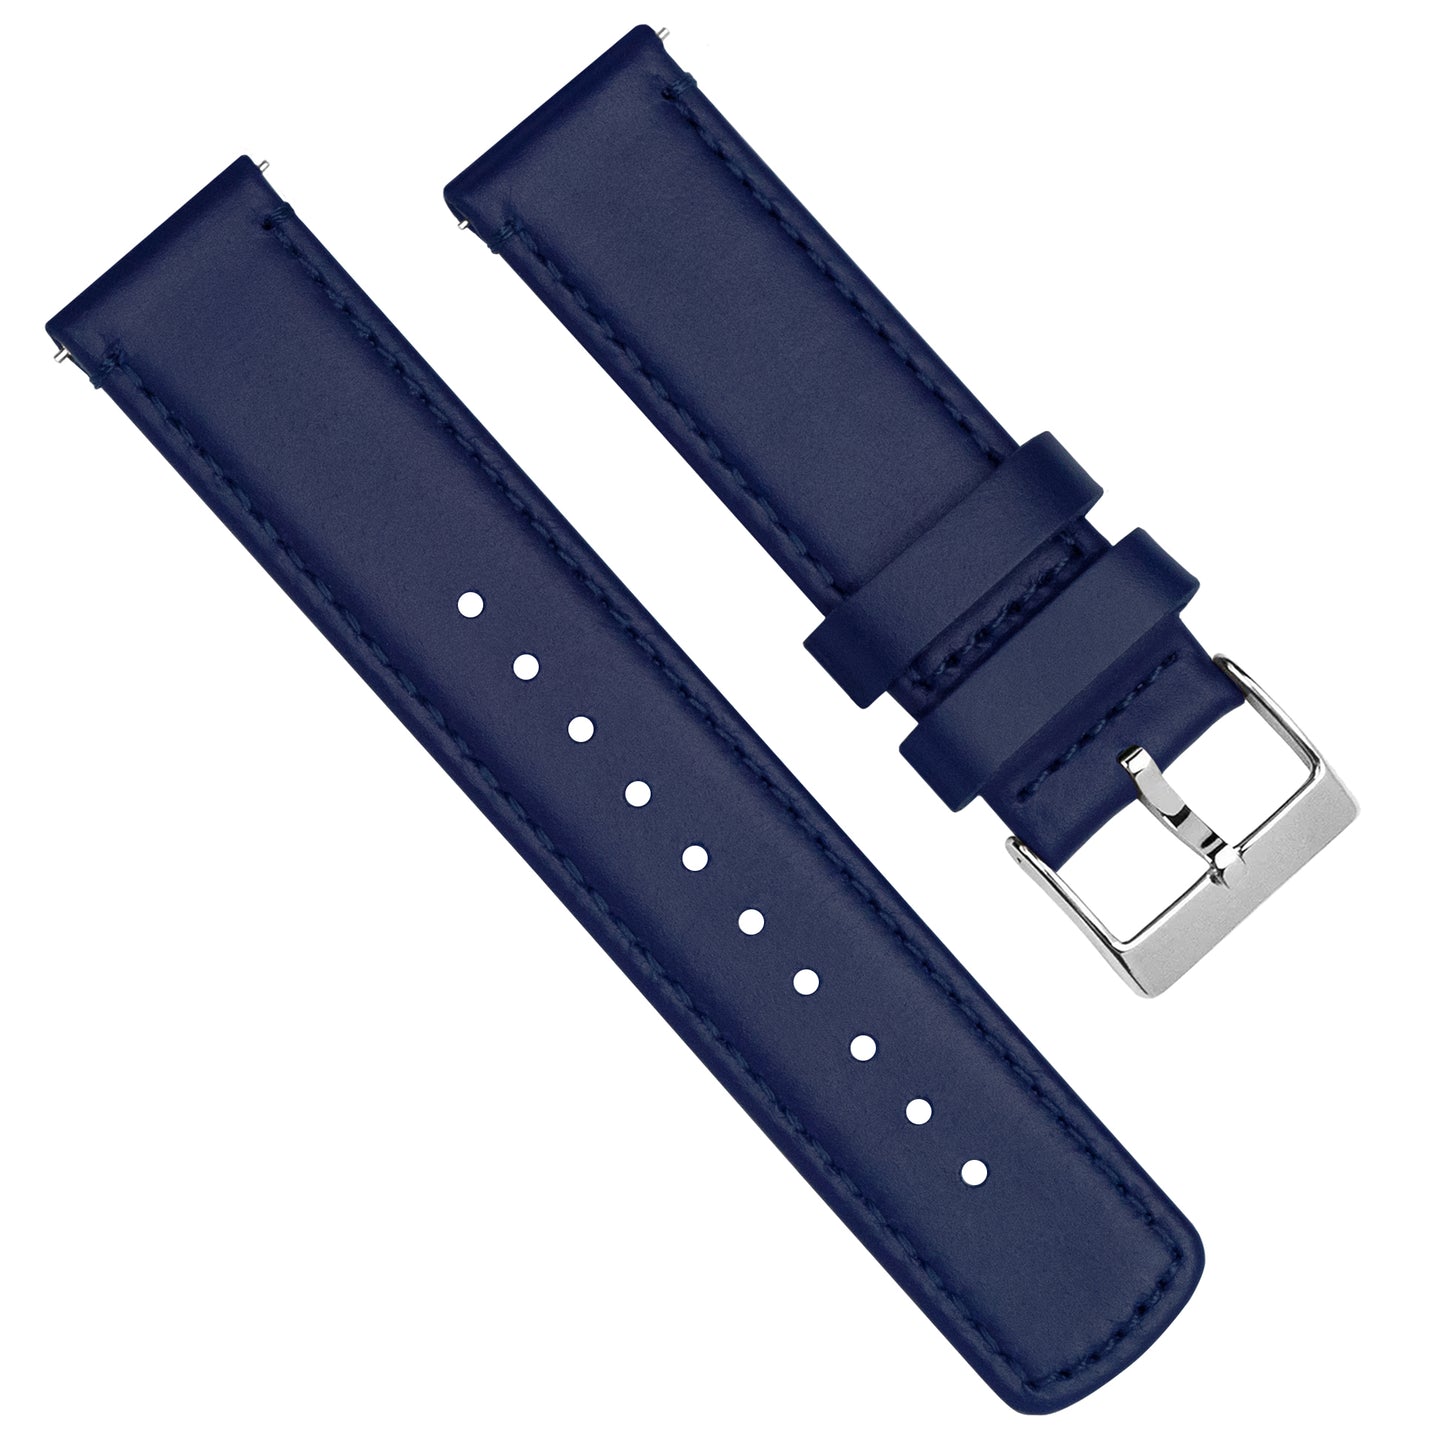 Gear Sport | Navy Blue Leather & Stitching - Barton Watch Bands